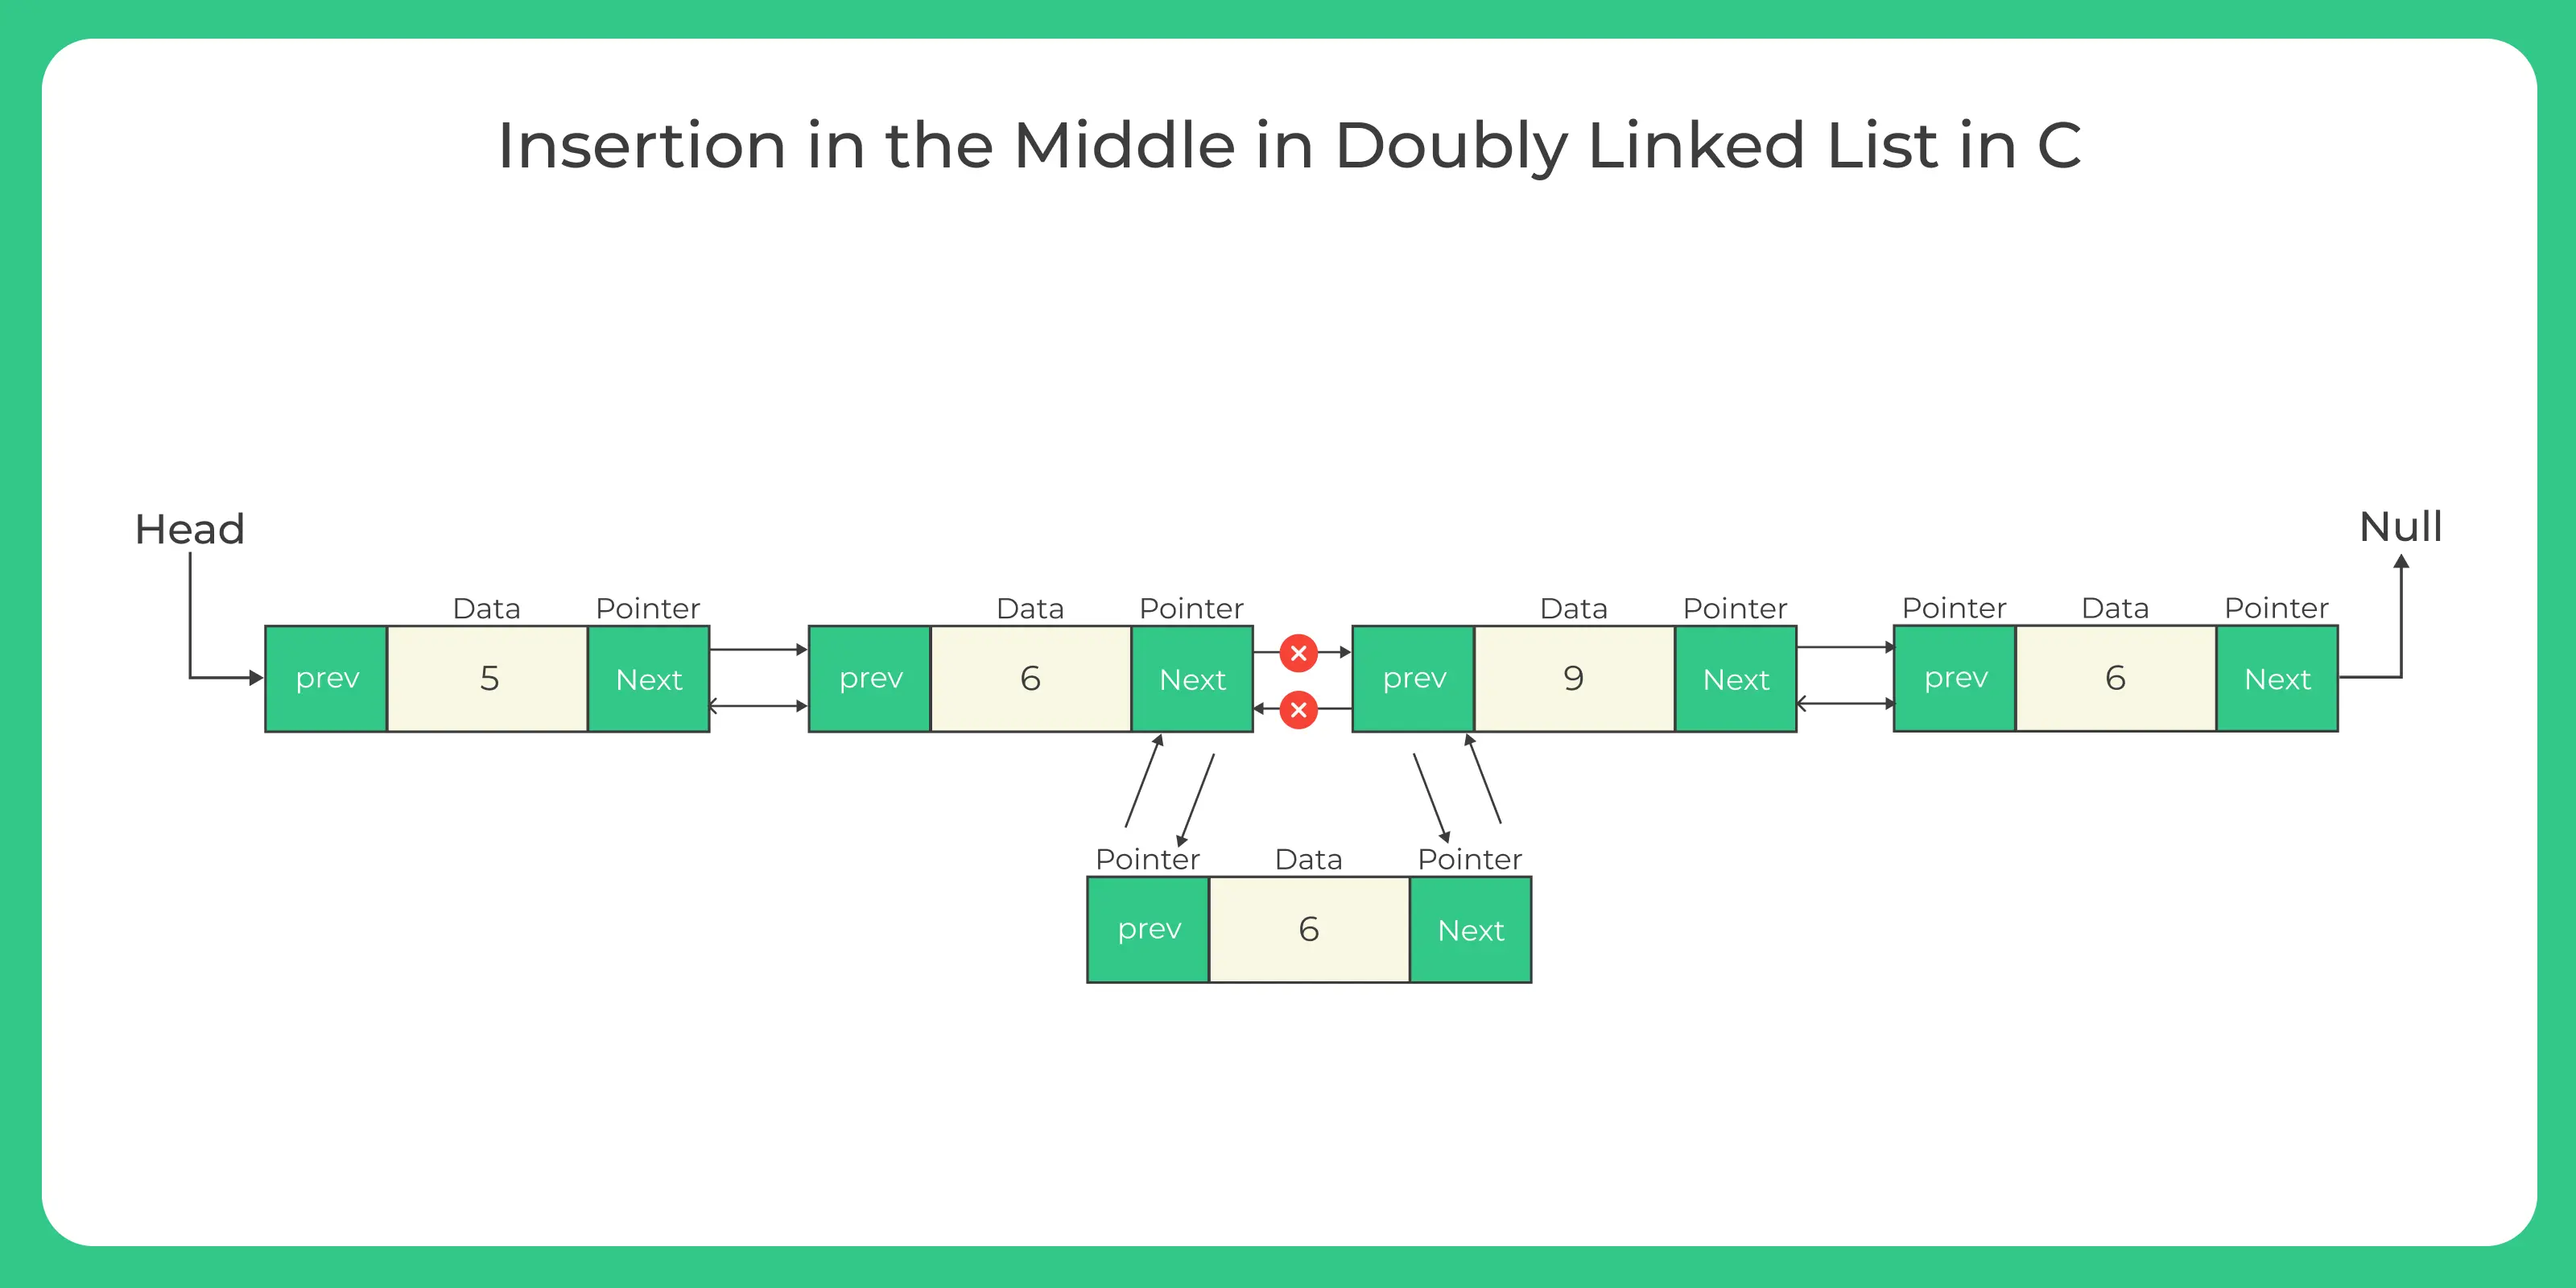 Insertion in Middle Doubly Linked List in C